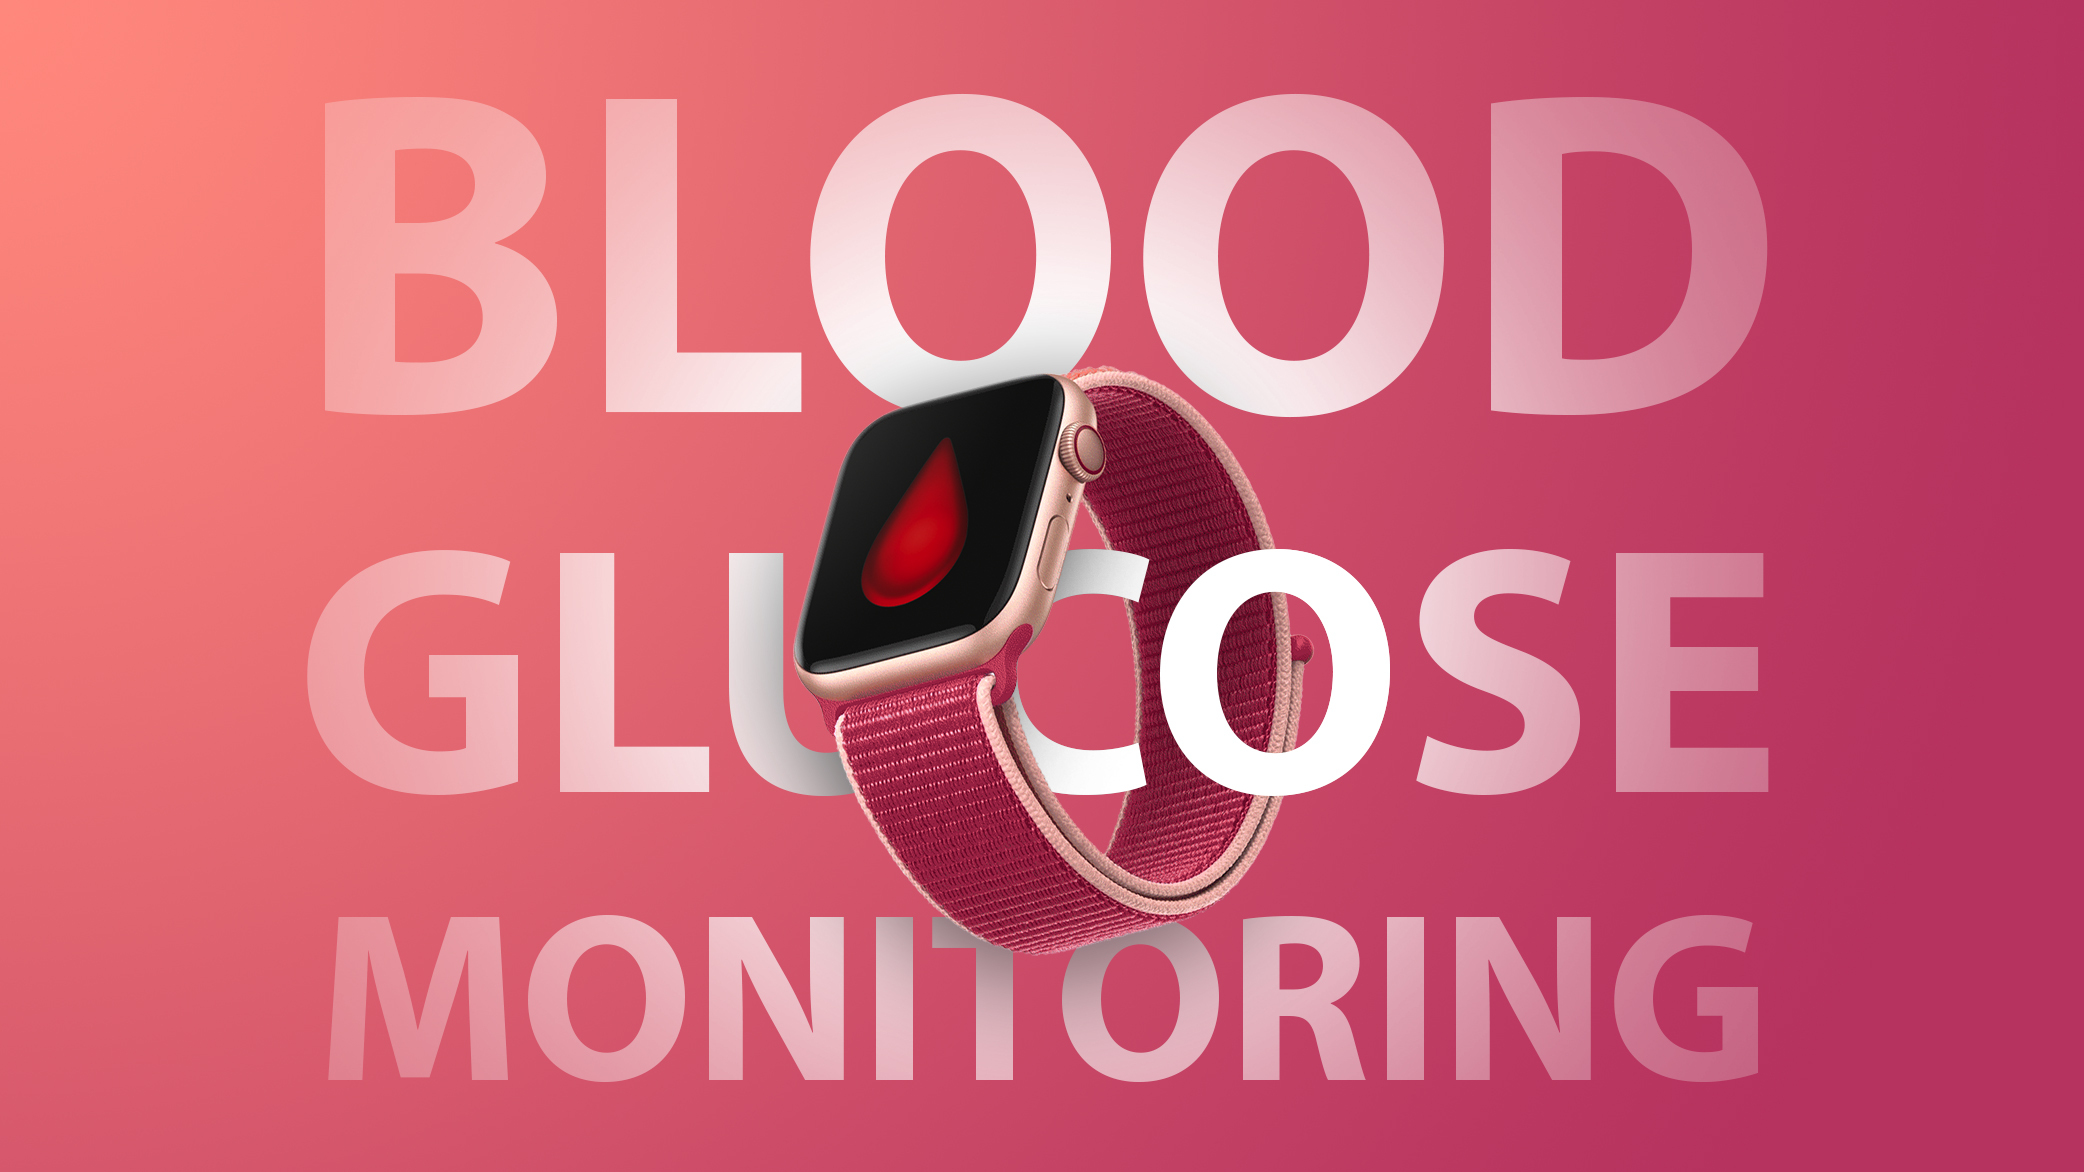 Apple’s Noninvasive Blood Glucose Technology for Future Apple Watch Reaches ‘Proof-of Concept’ Stage